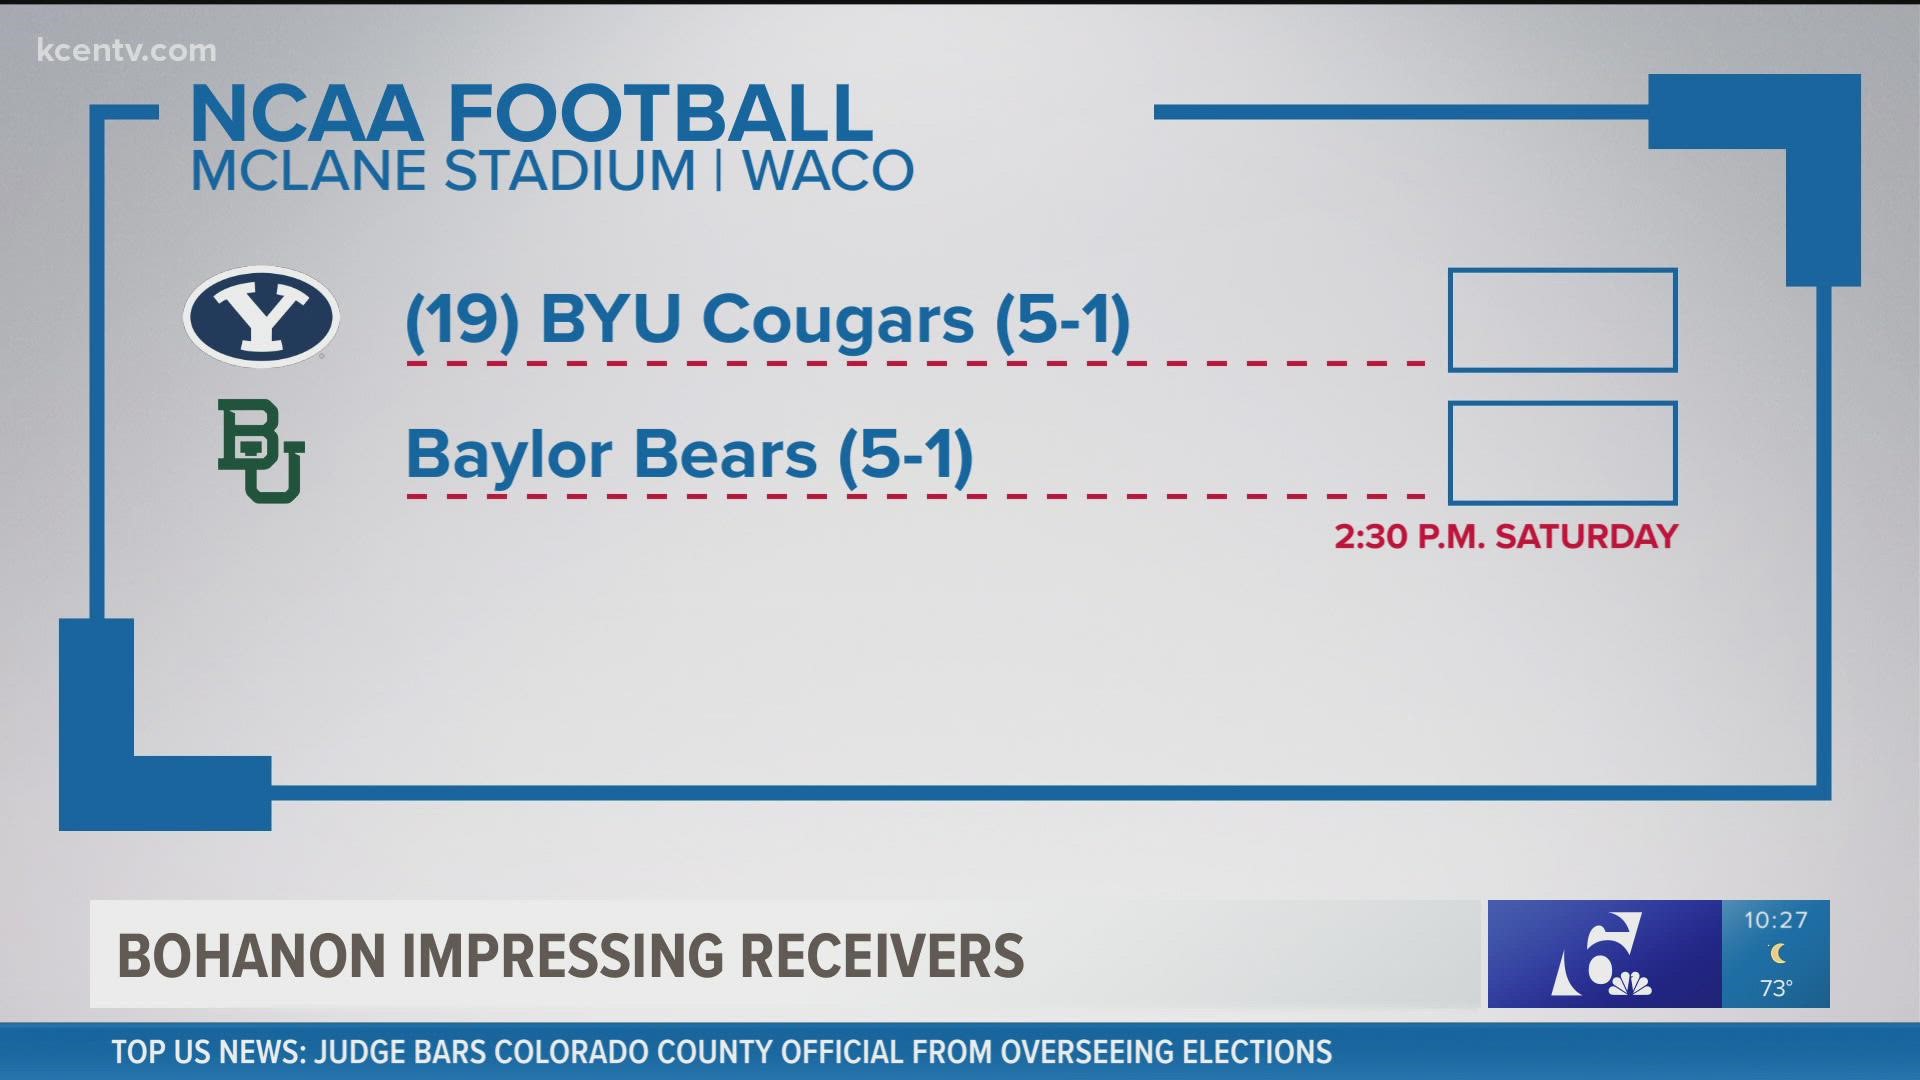 The Bears host BYU this Saturday.